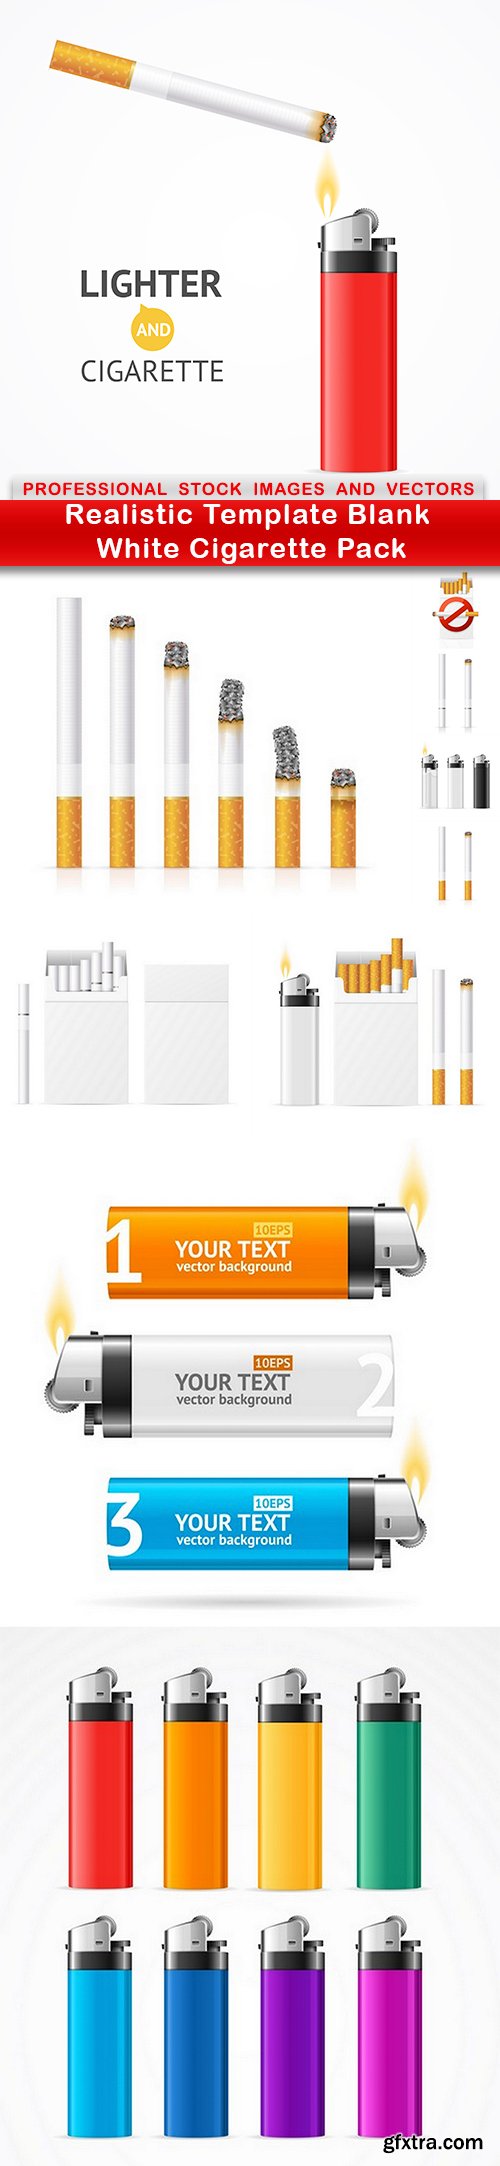 Realistic Template Blank White Cigarette Pack - 10 EPS